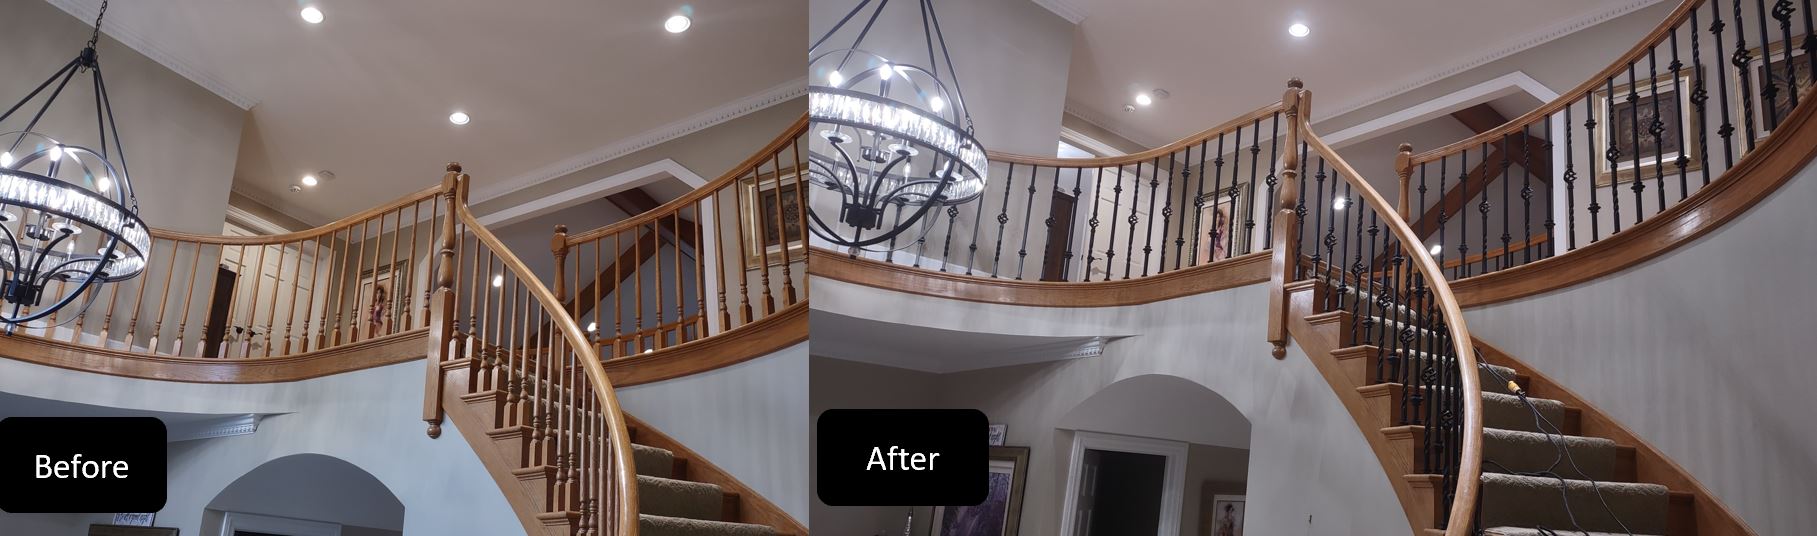 Before & After – Wood to Iron Balusters